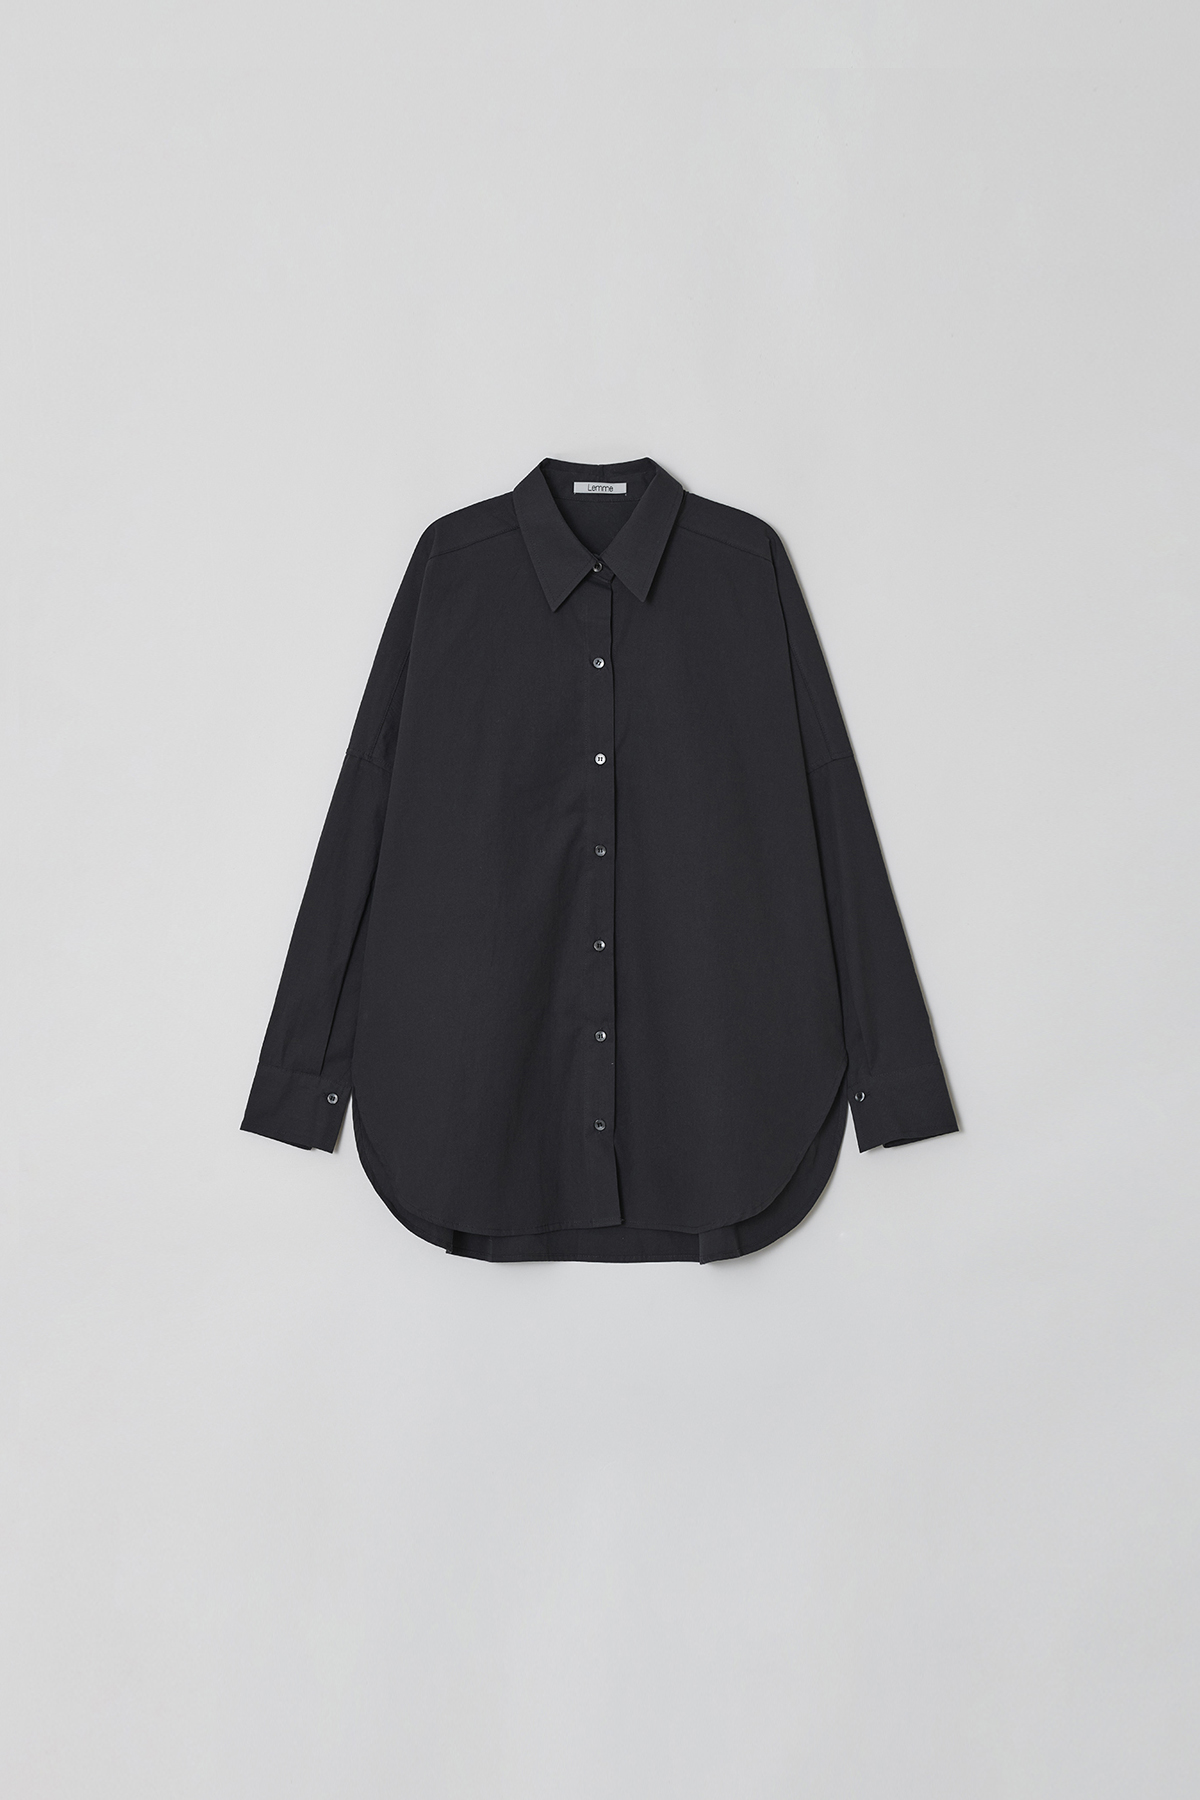 [NEW] OVERFIT COTTON SHIRTS, CHARCOAL